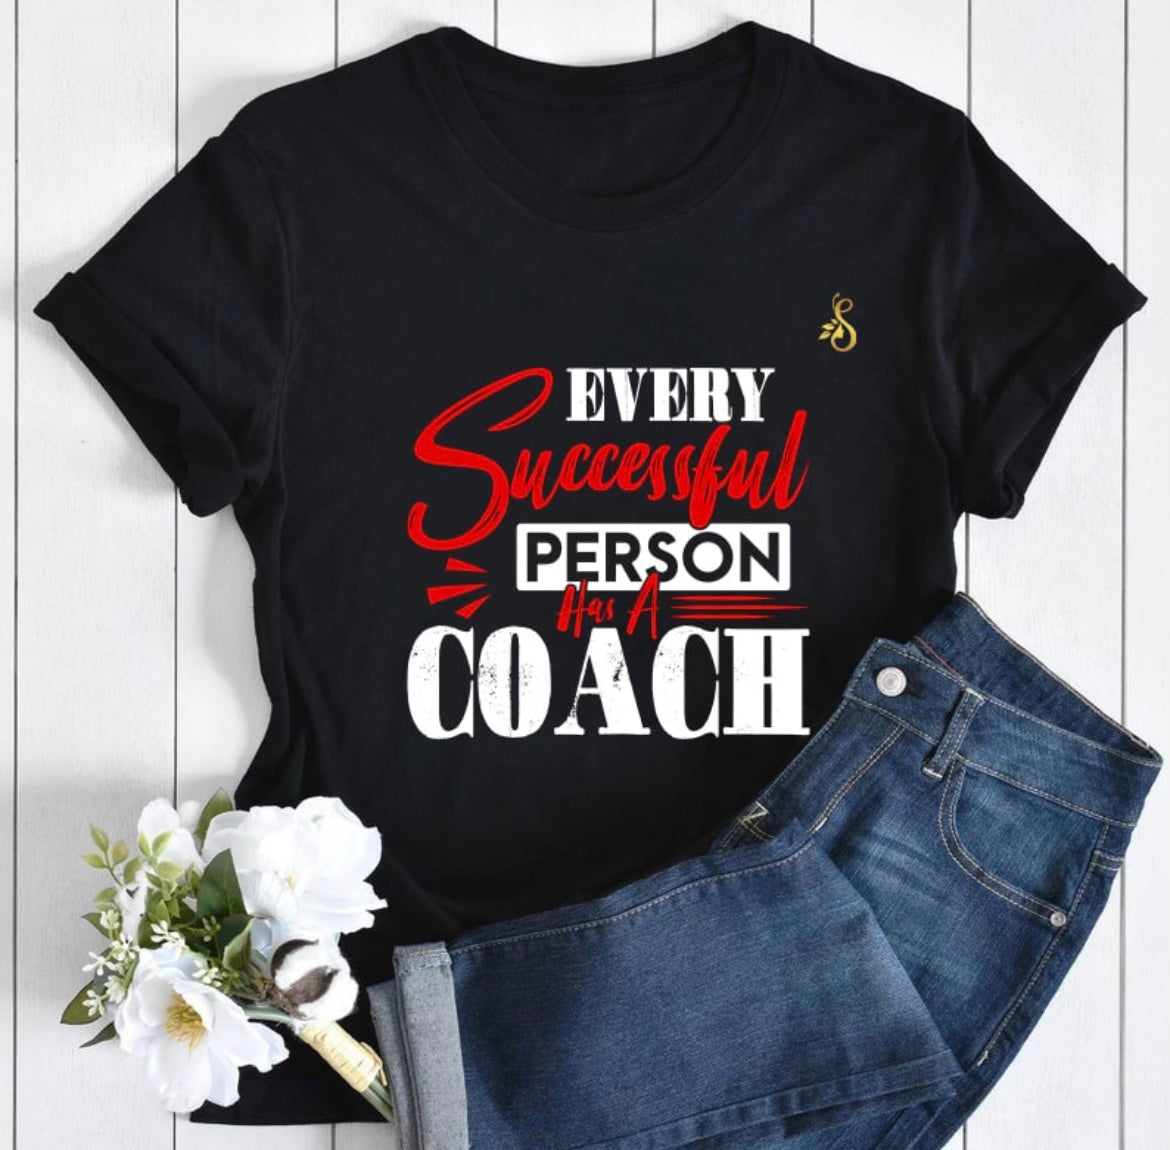 Every Successful Person Has A Coach Adult Tee (Red 2.0)